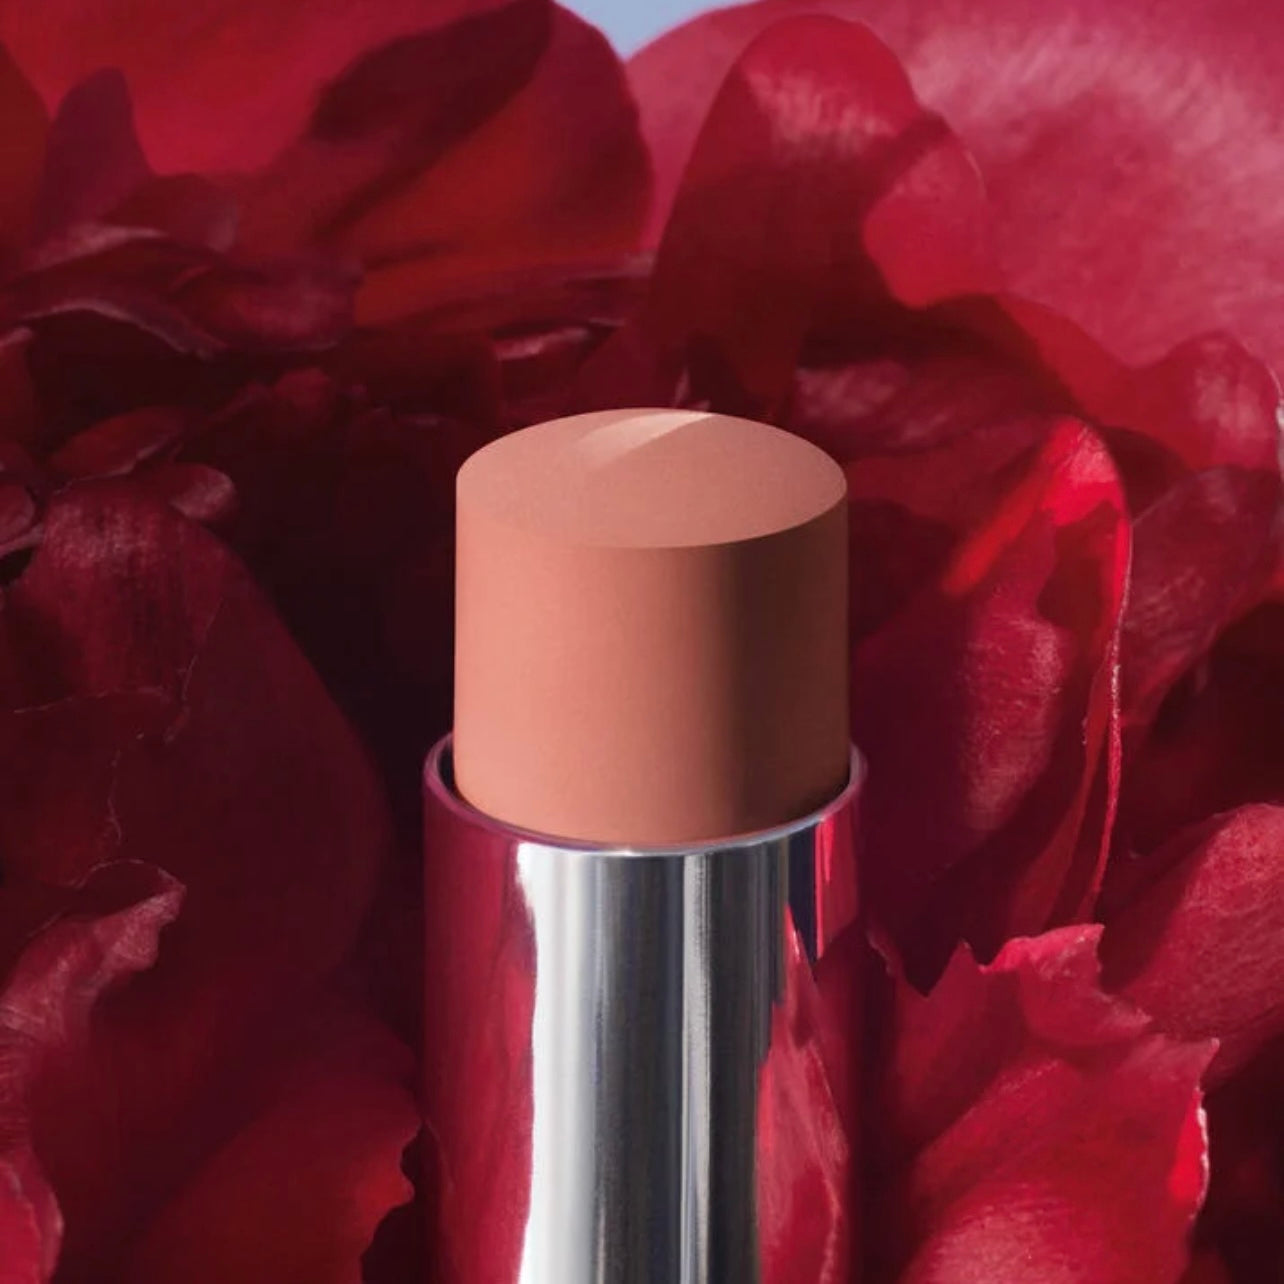 Dior ROUGE FOREVER Transfer-Proof Lipstick in 100 FOREVER NUDE LOOK